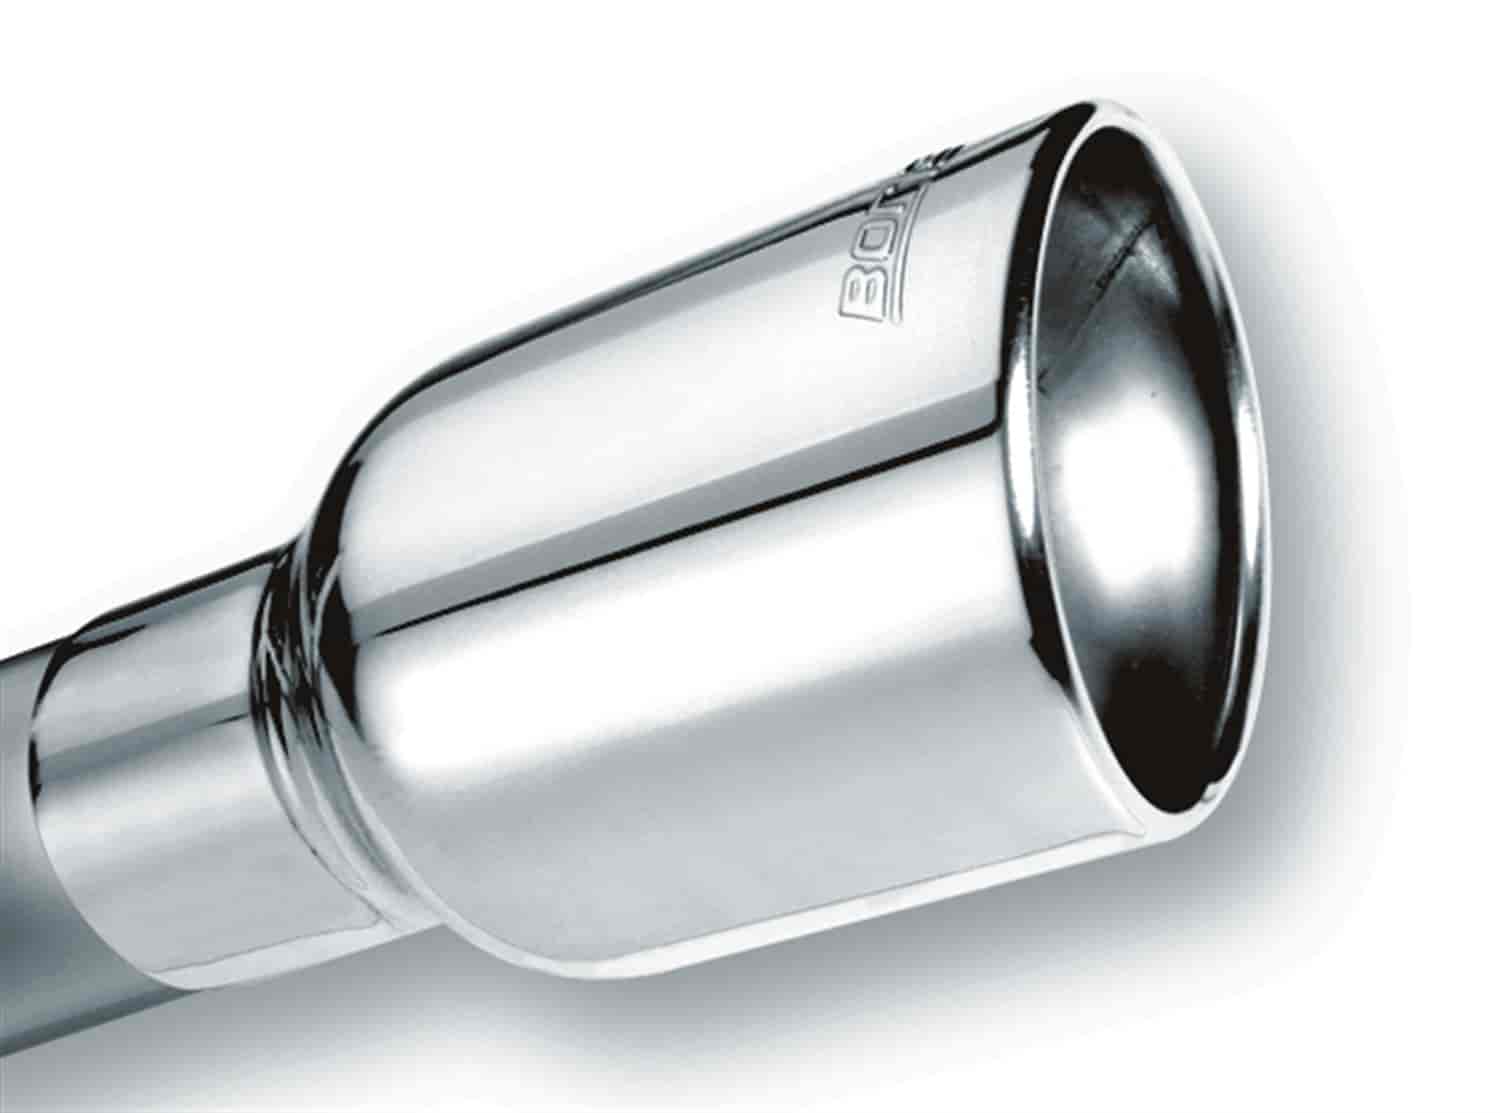 Stainless Steel Exhaust Tip Outlet Size: 4" x 4-3/4"